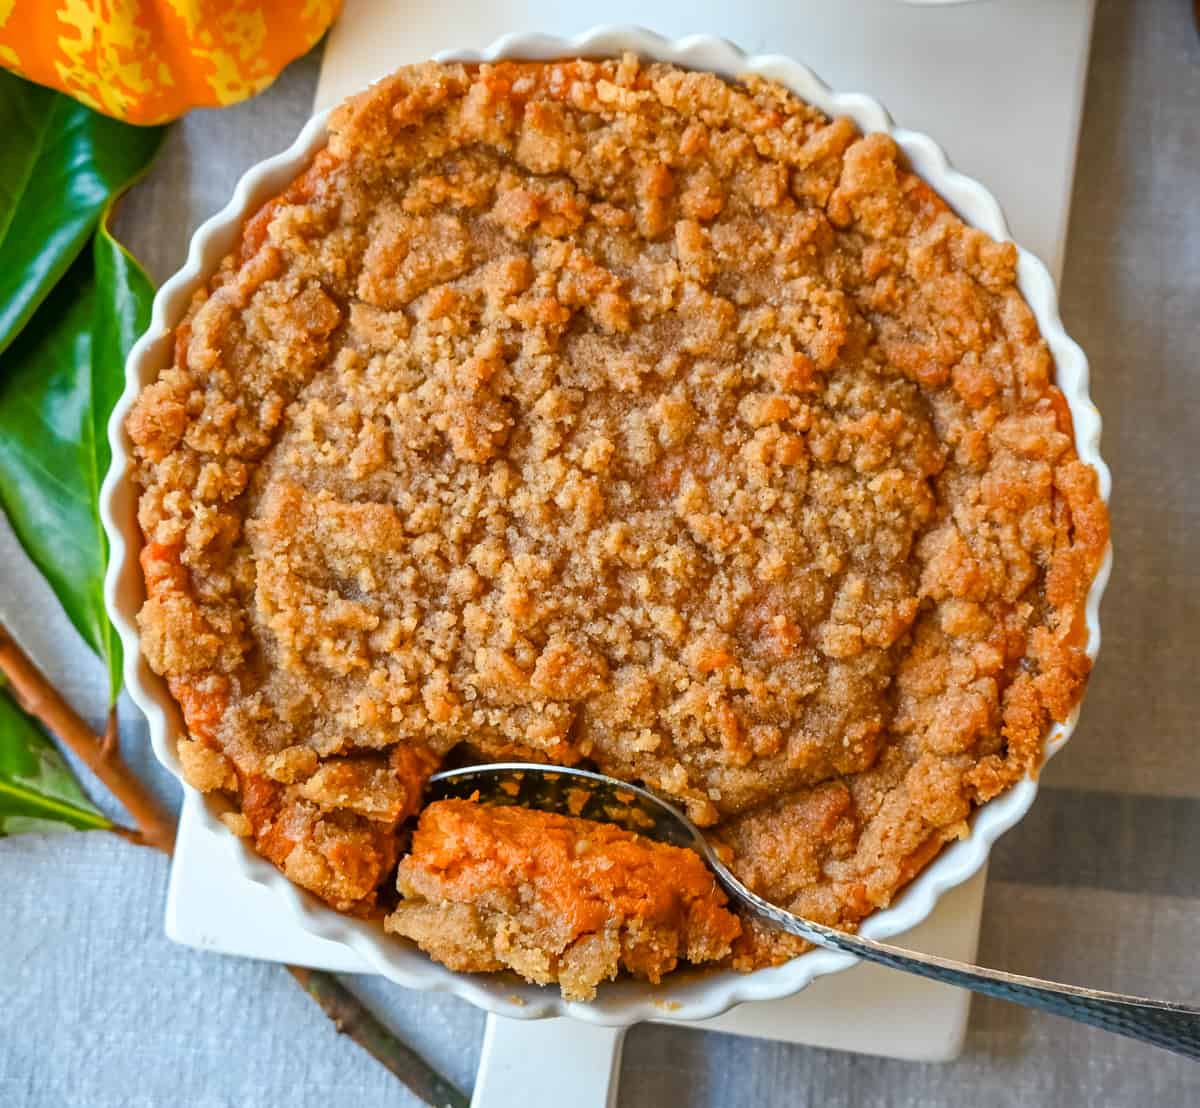 Best Sweet Potato Casserole. This creamy sweet potato casserole with a brown sugar topping is one of the most popular Thanksgiving side dish recipes. Everyone loves it! It is so easy and can be made ahead of time. It is the perfect holiday side dish recipe.